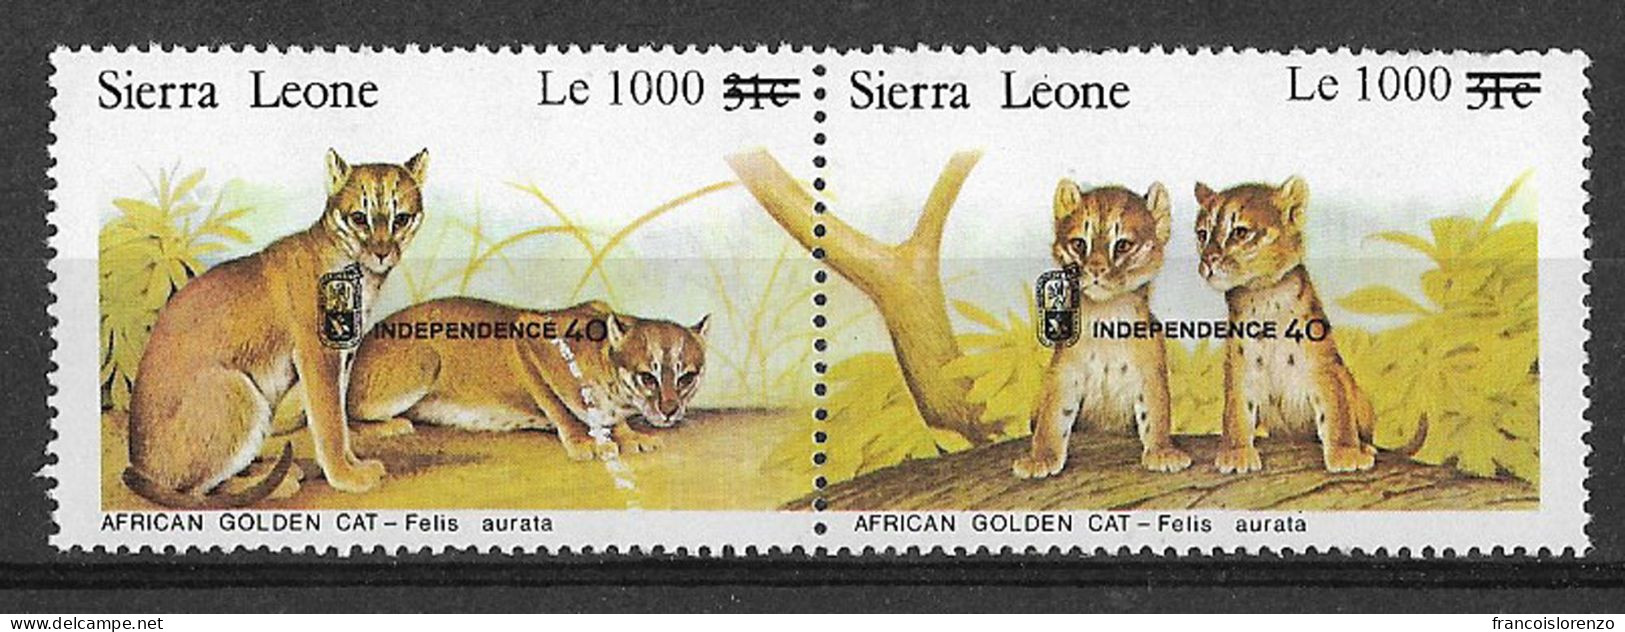 Sierra Leone 1988 Wild Animals Cats Of Prey Philately Israel Stamp Exhibition Independence Rare Set MNH - Big Cats (cats Of Prey)